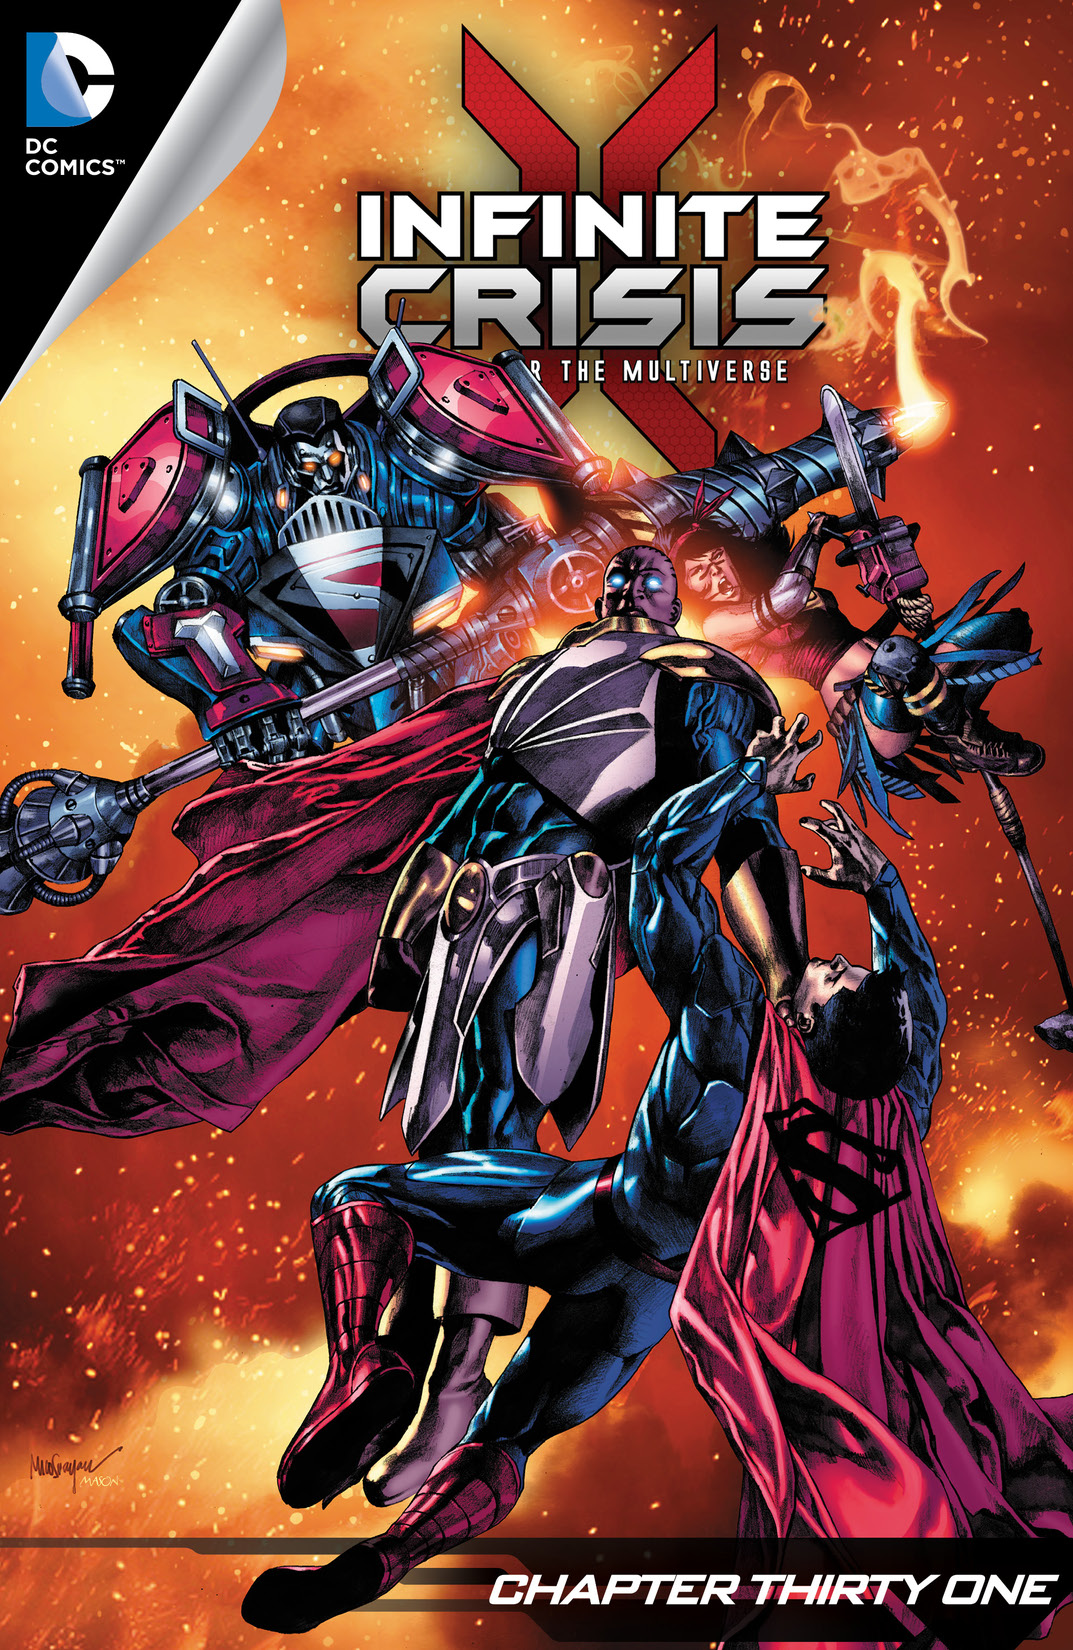 Infinite Crisis: Fight for the Multiverse #31 preview images